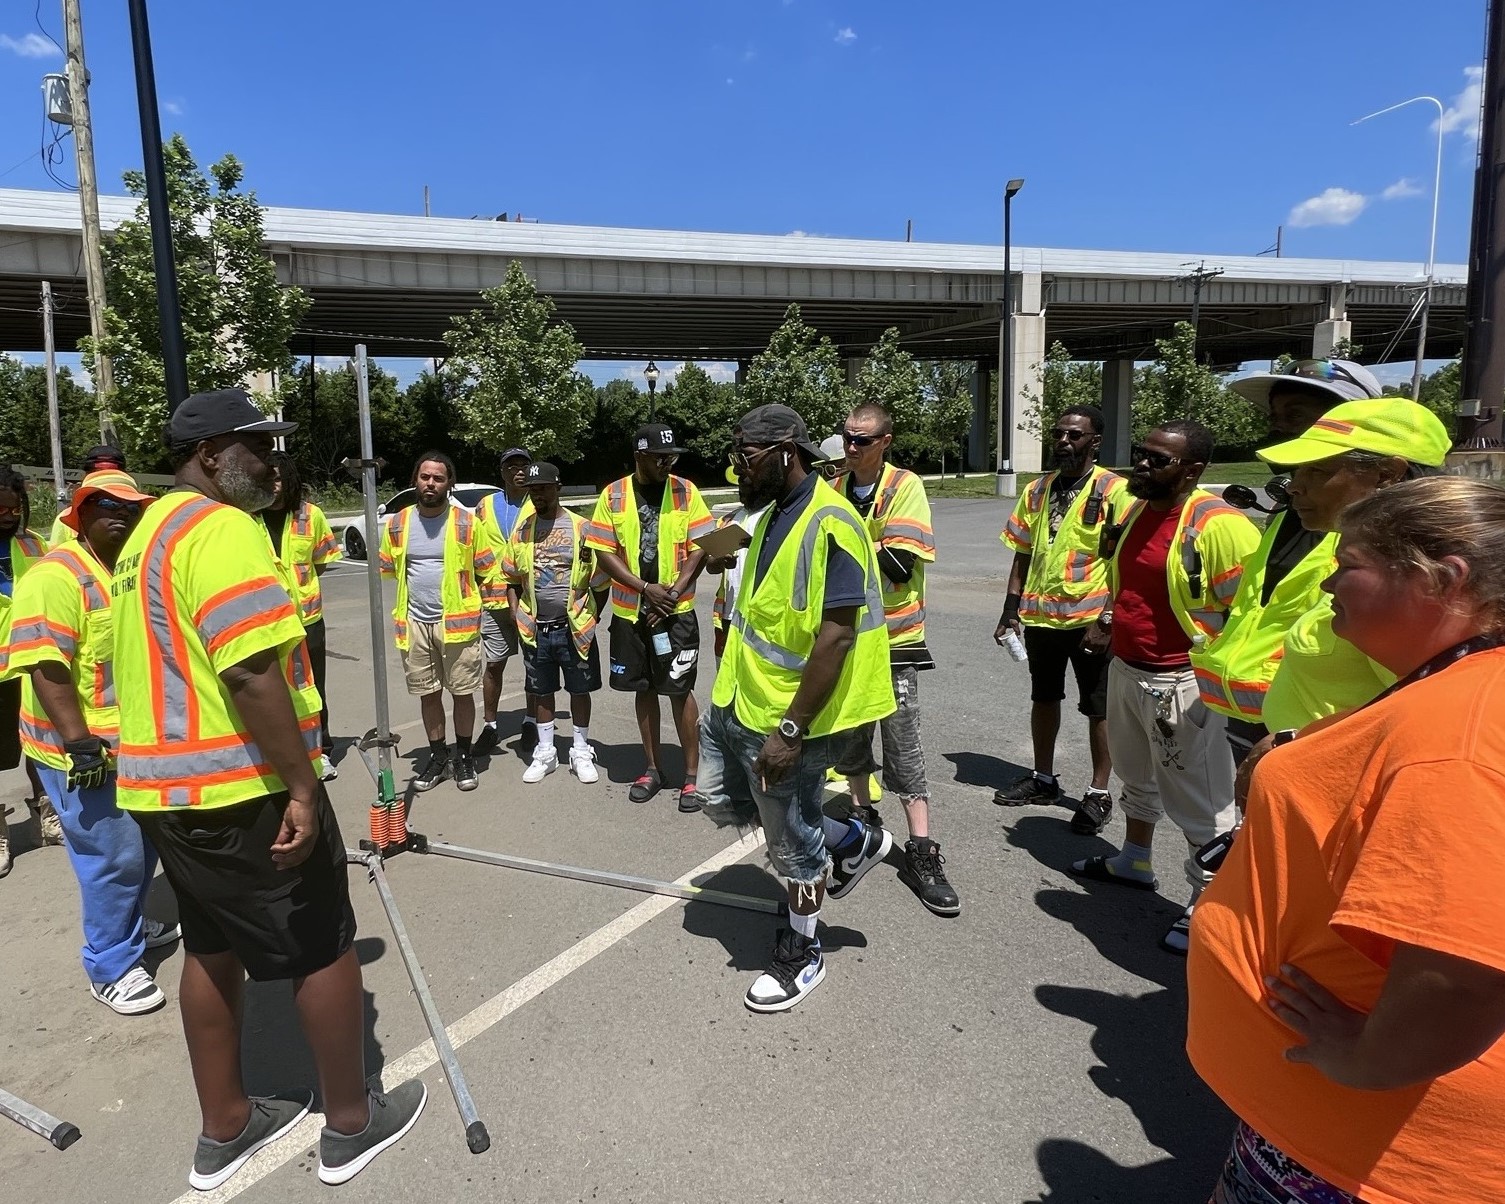 An image of a group of individuals in yellow safety vests standing in a parking lot next to a bridge, circled around an individual in a yellow safety vest who is talking to them